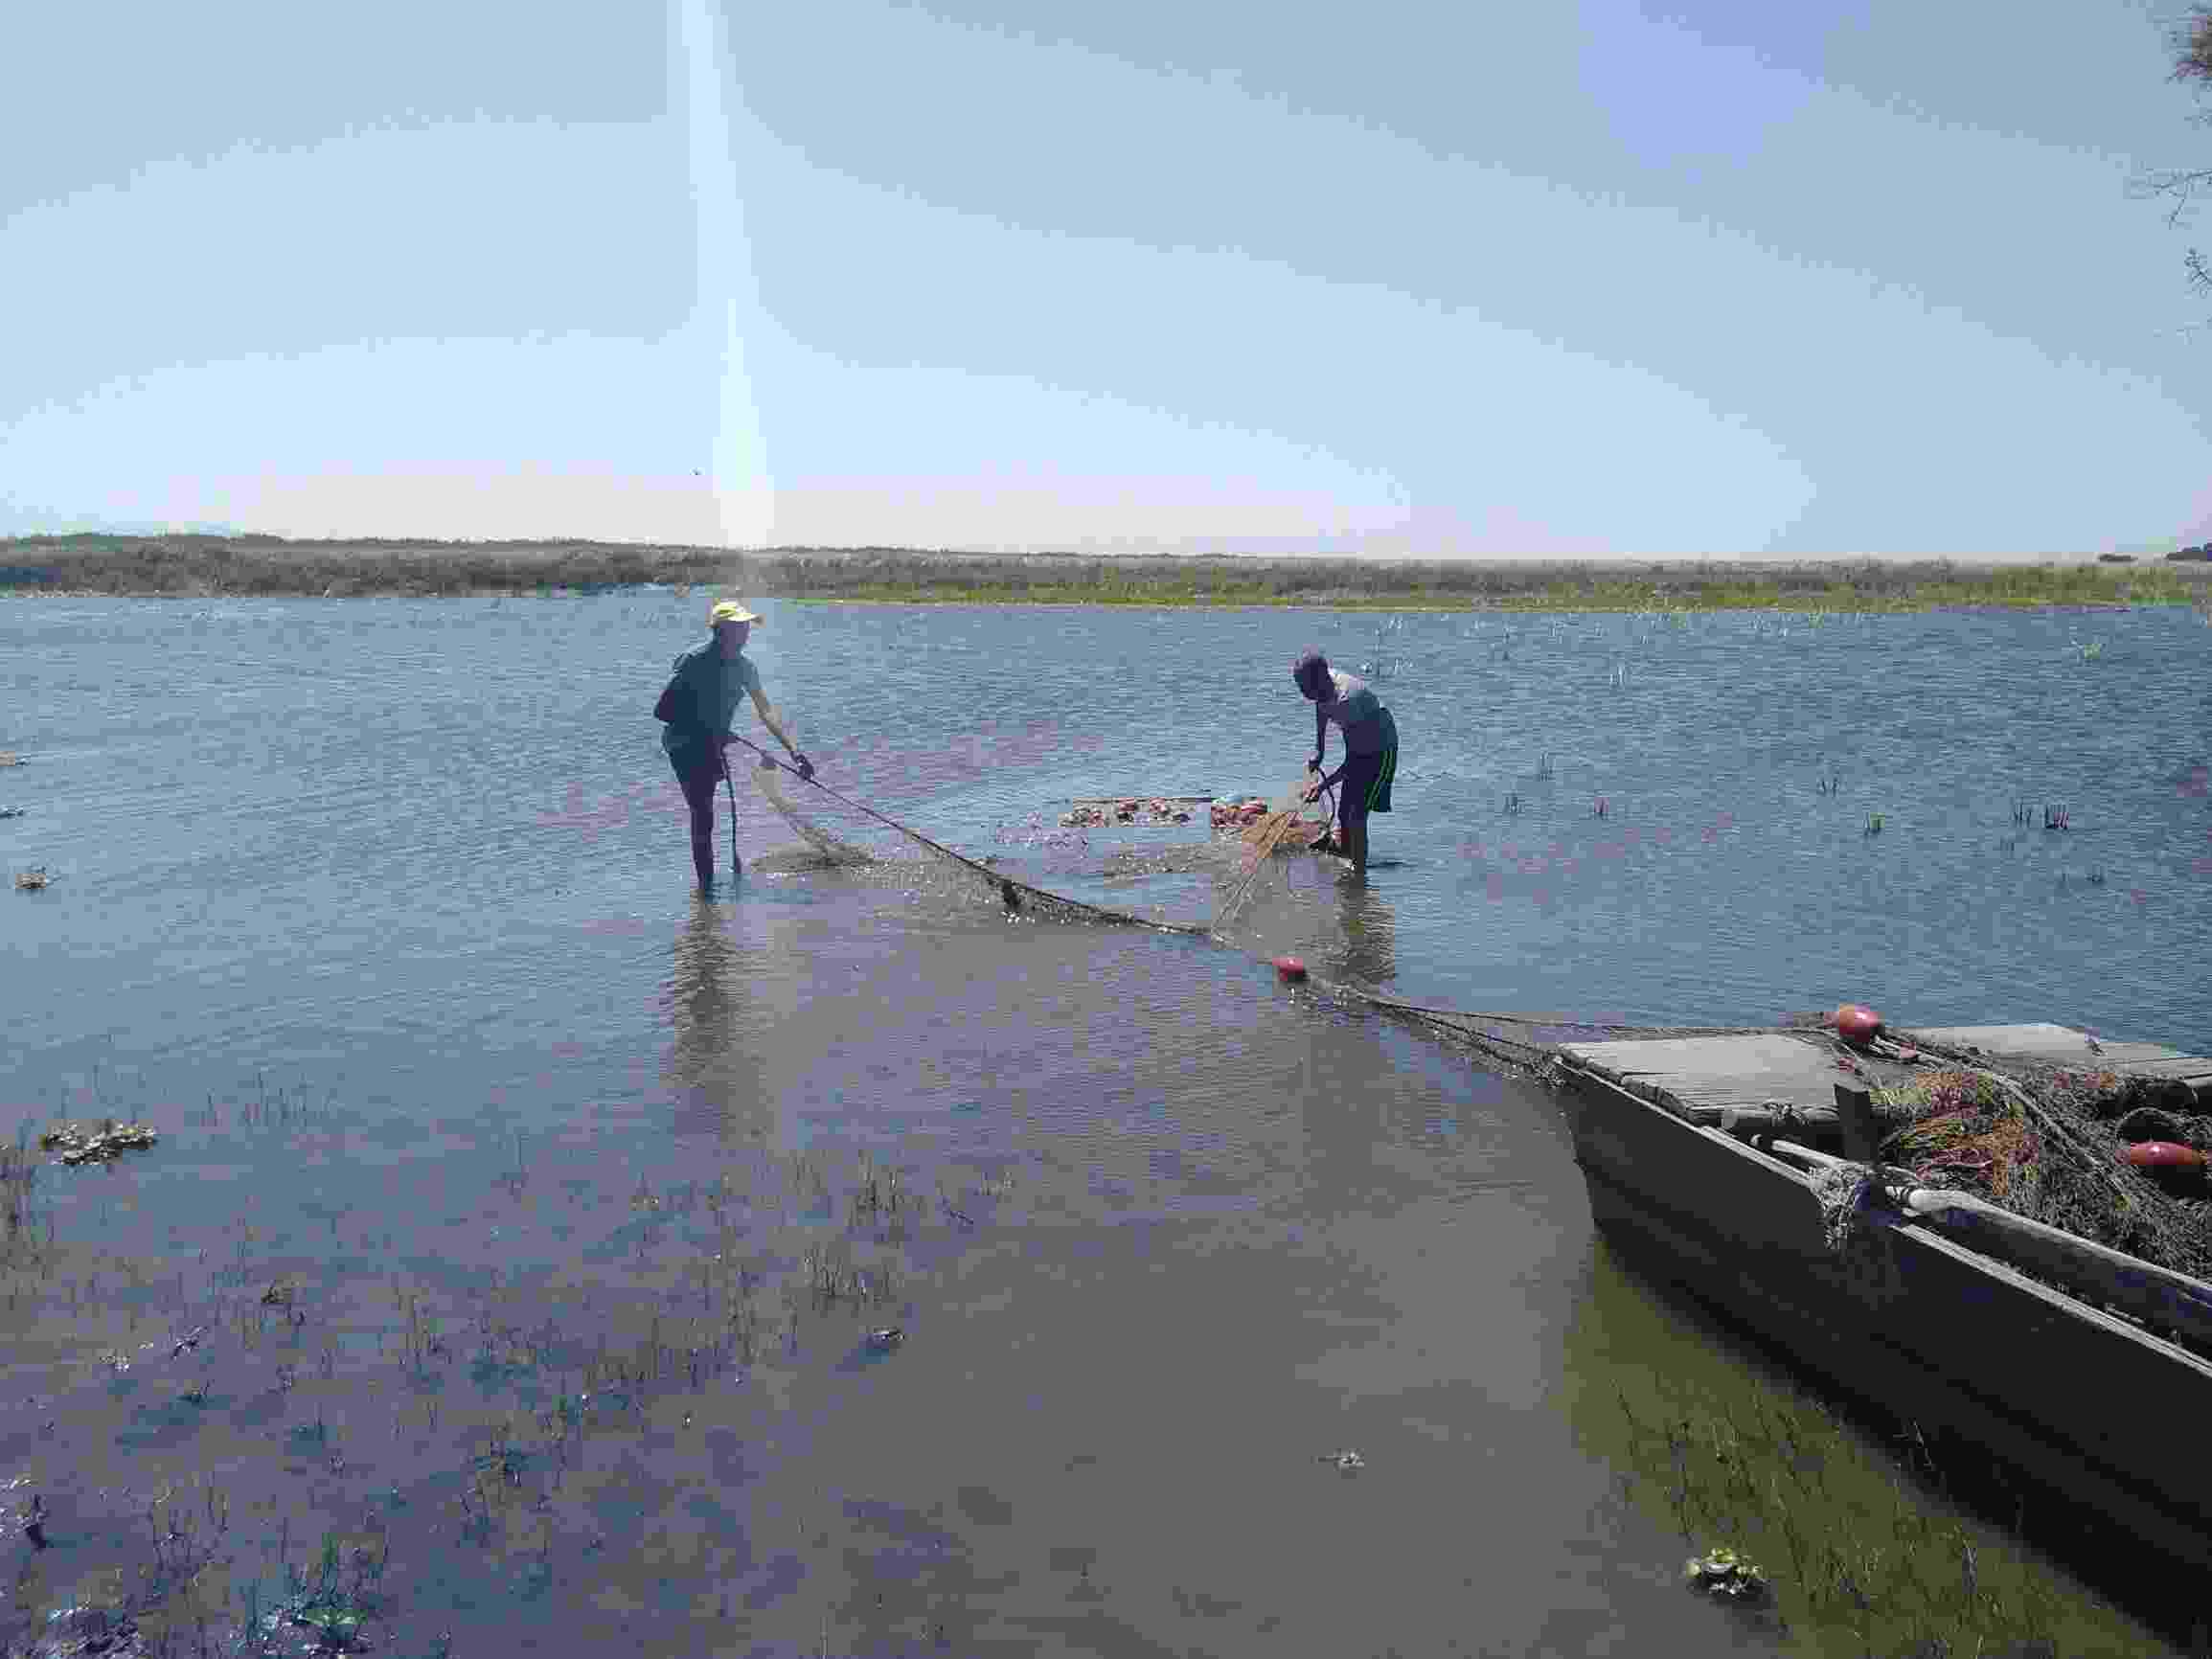 Two men stand ankle-deep in Lake Ziway as they cast fishing nets from their boat on a bright, sunny day